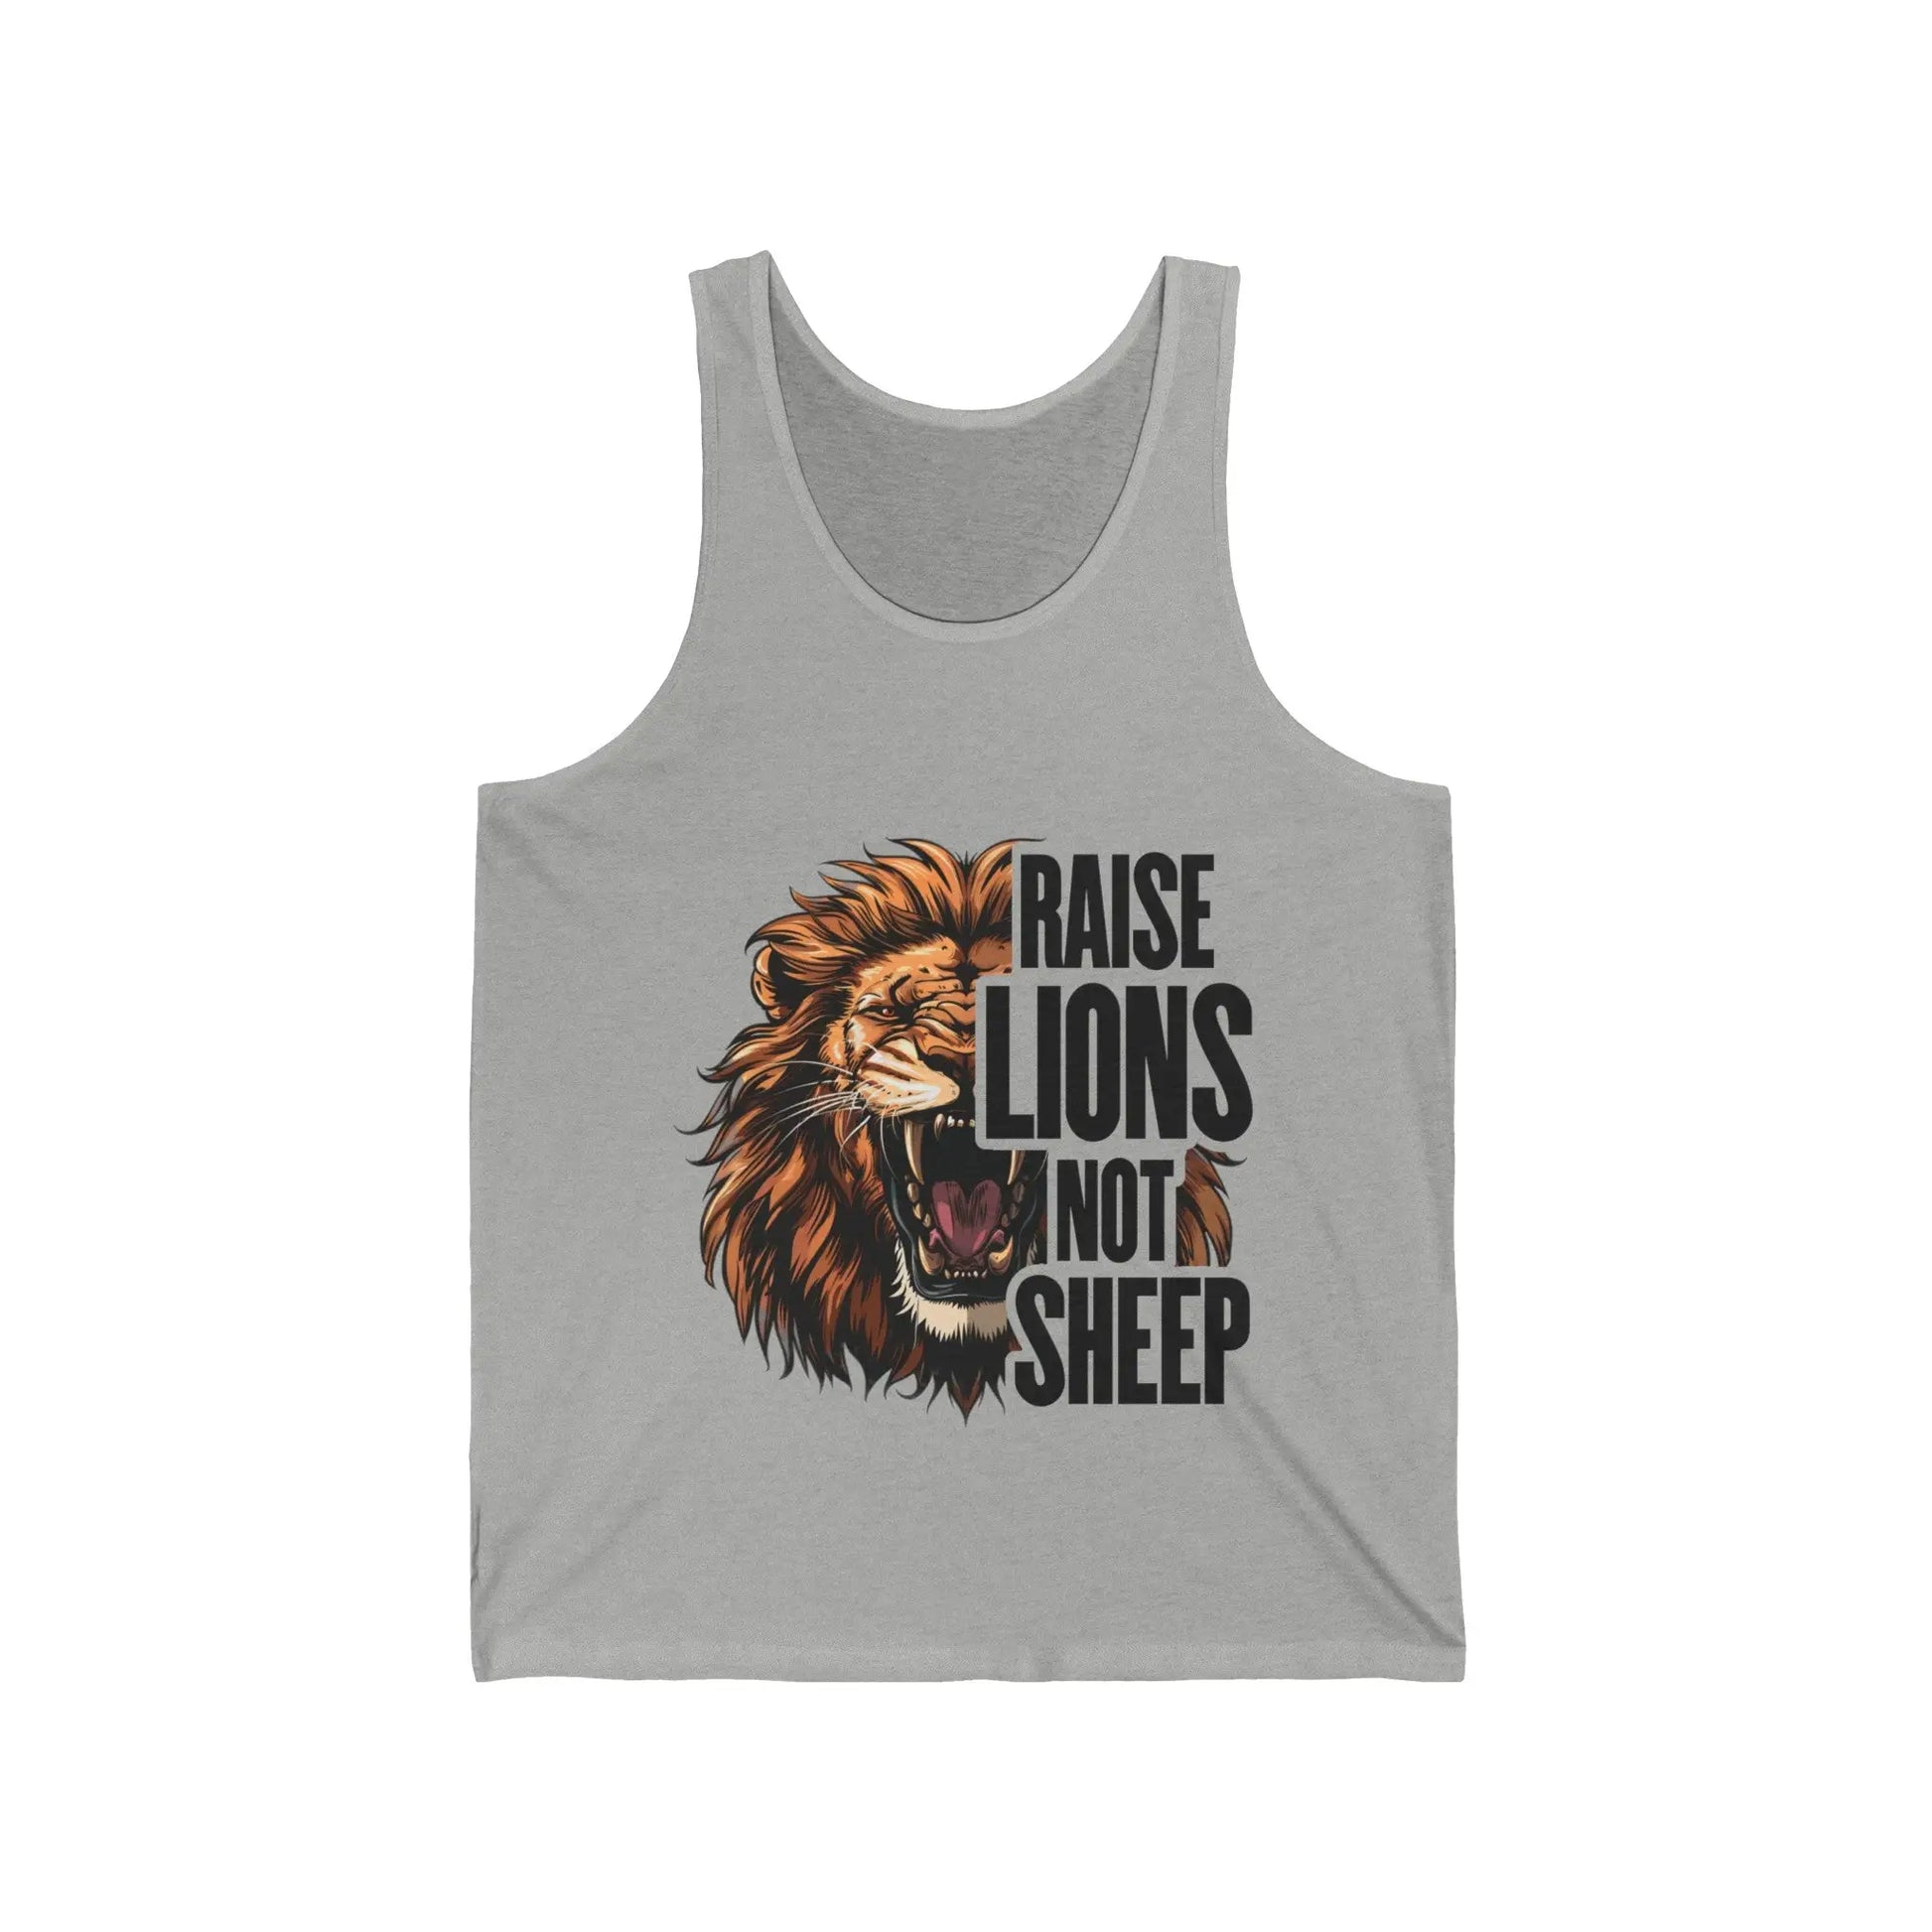 Raise Lions Not Sheep Men's Tank - Wicked Tees